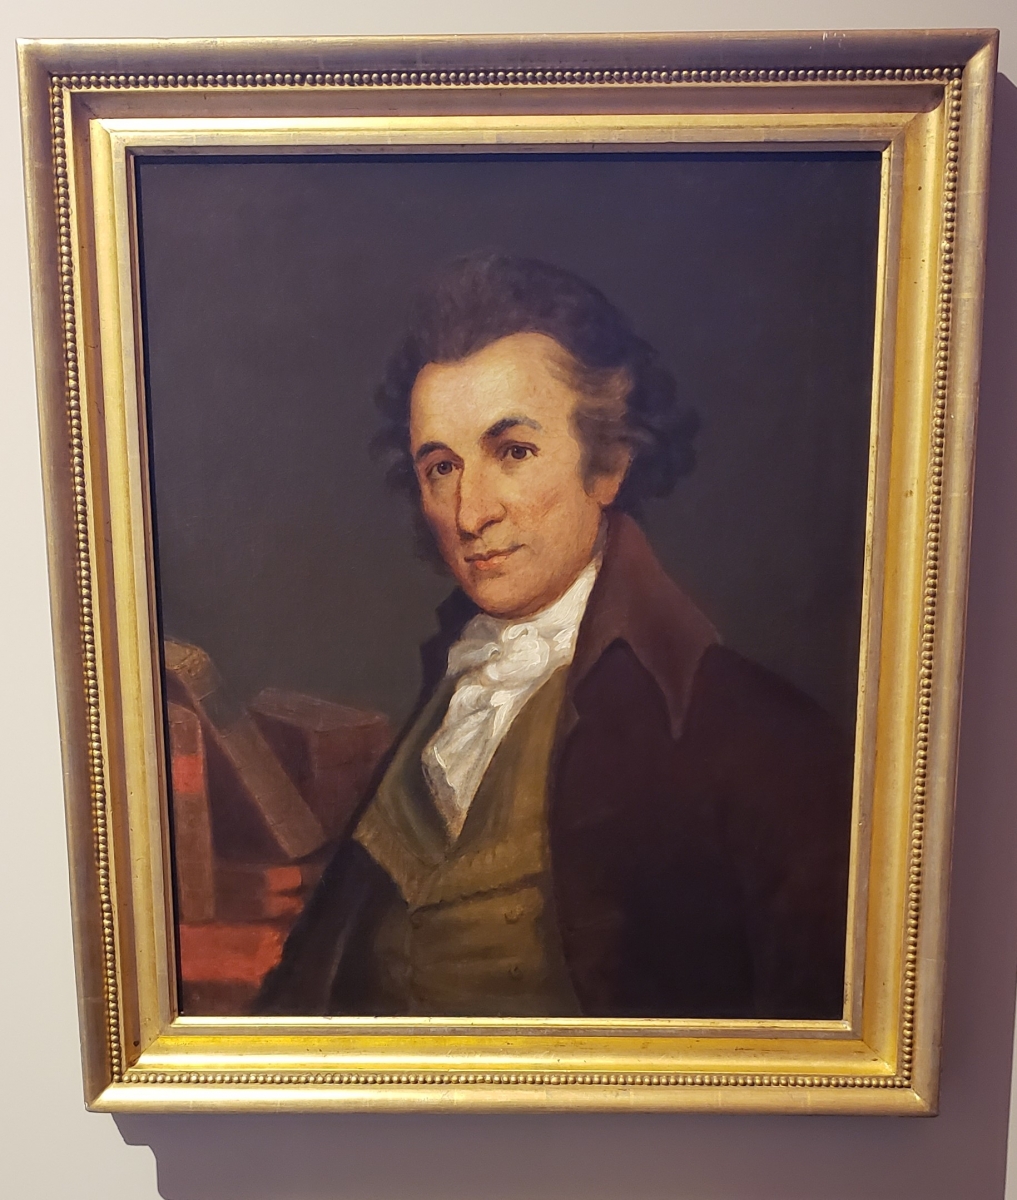 Thomas Paine Portrait located in the Second Bank of the United States Portrait Gallery